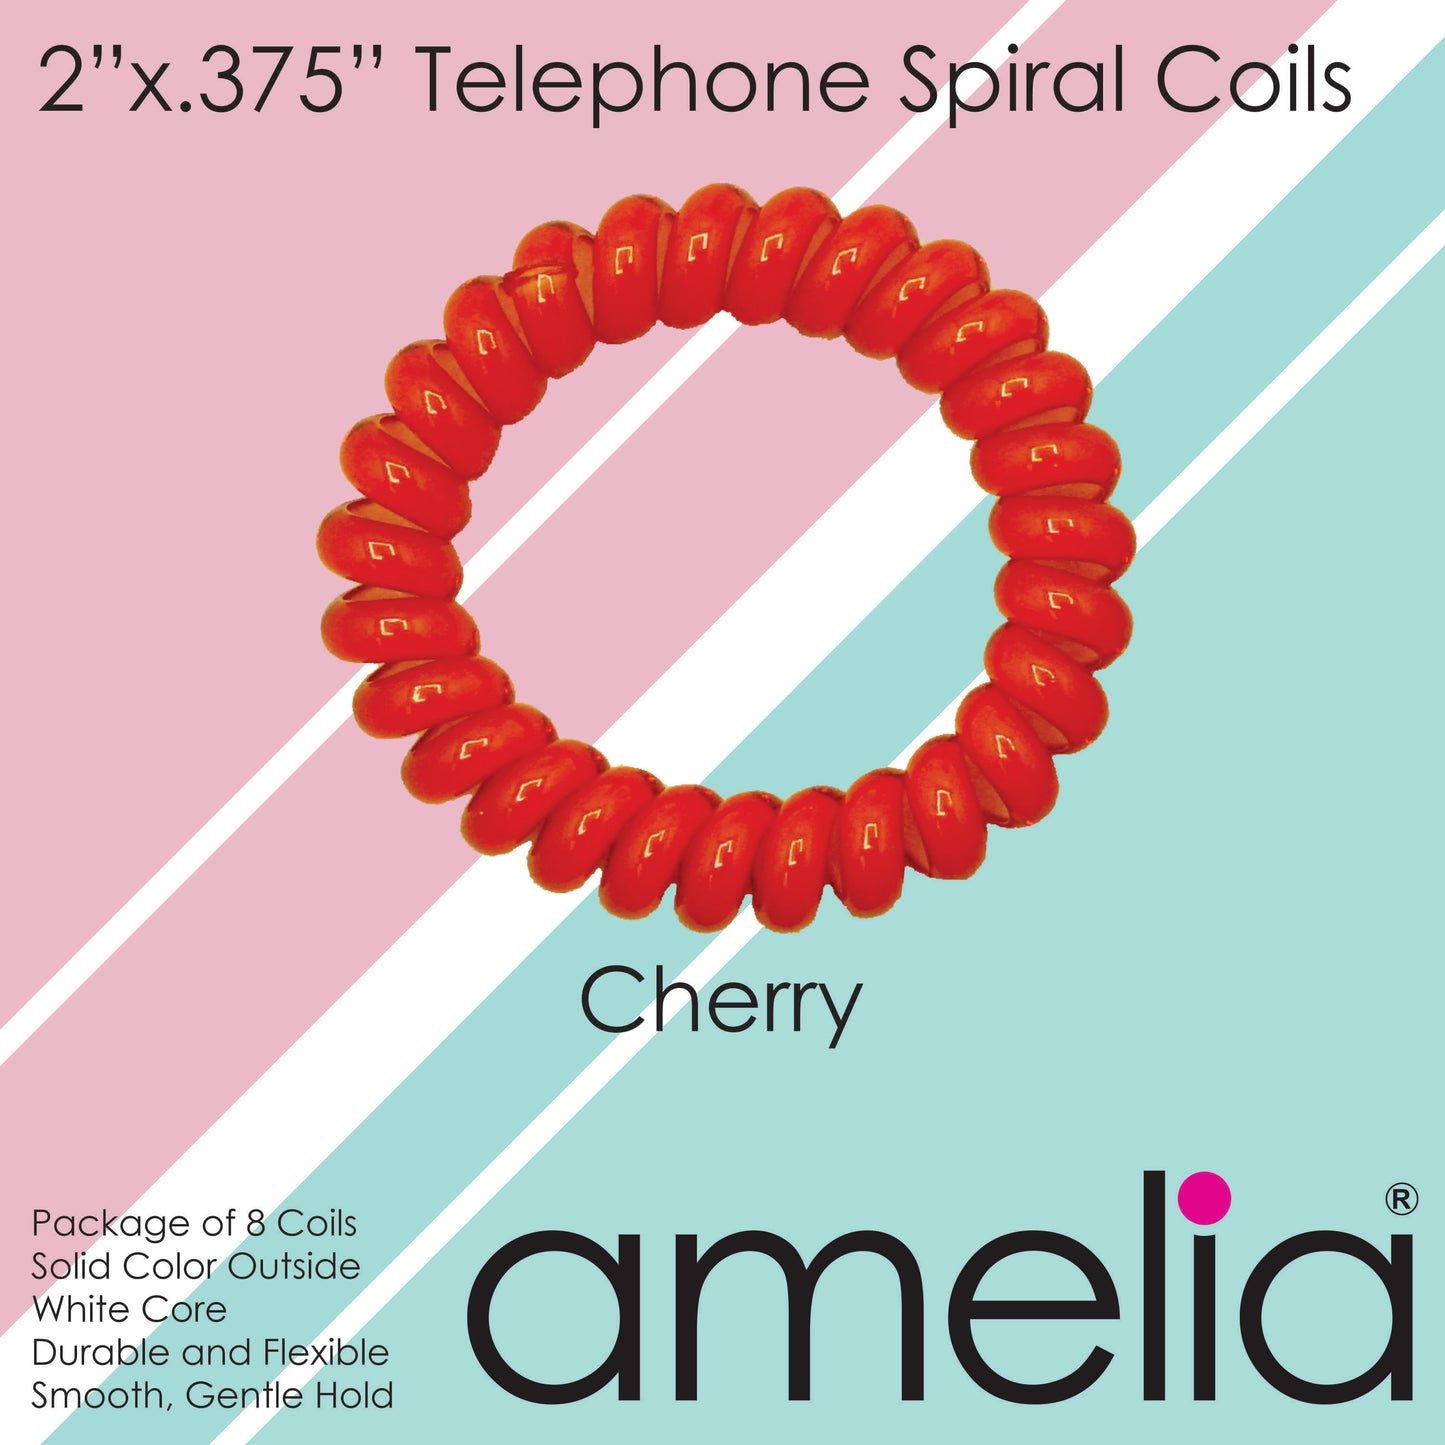 Amelia Beauty Products 8 Medium Elastic Hair Coils, 2.0in Diameter Thick Spiral Hair Ties, Gentle on Hair, Strong Hold and Minimizes Dents and Creases, Cherry